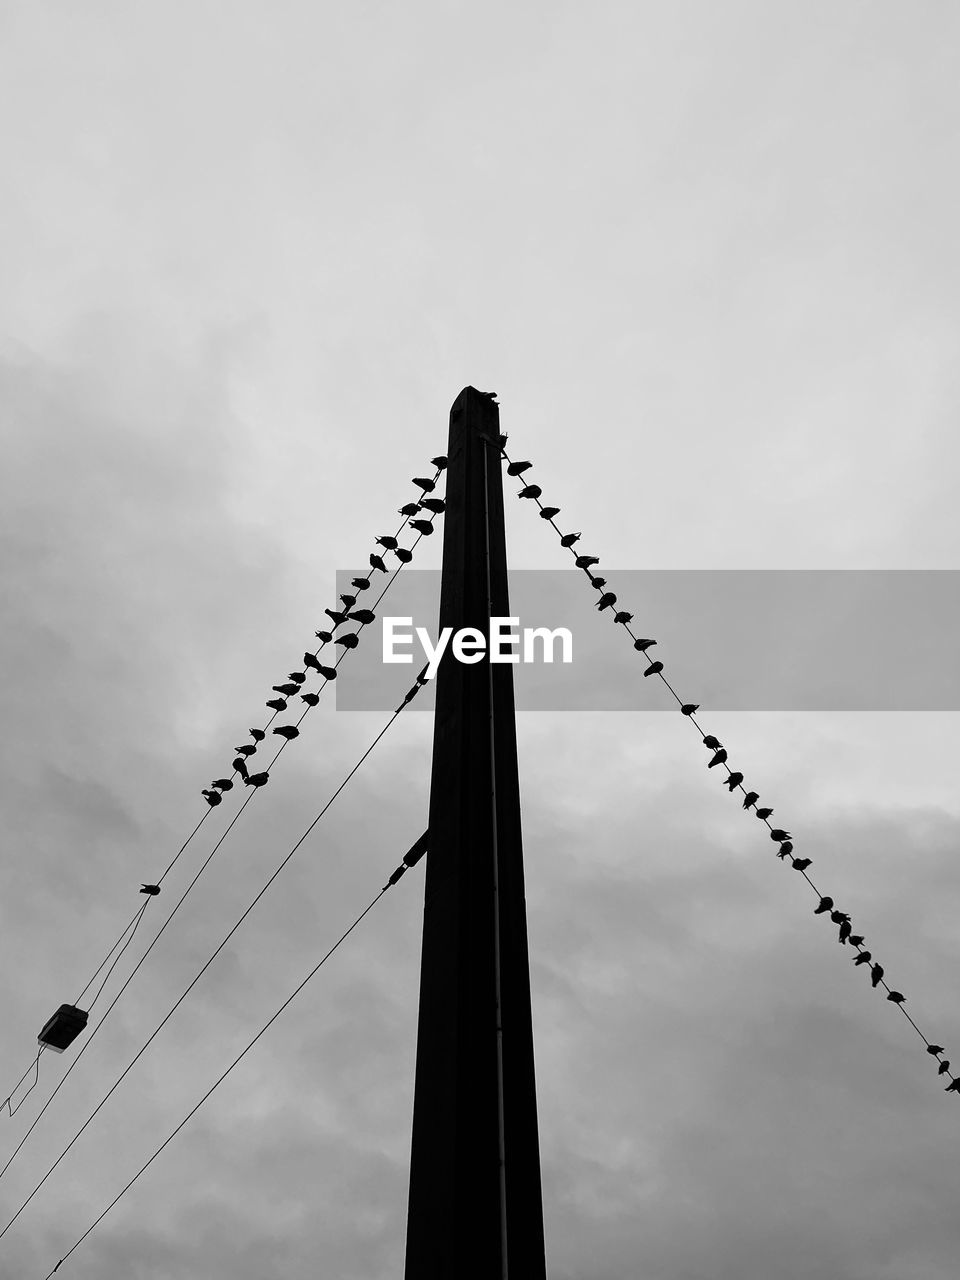 LOW ANGLE VIEW OF CABLES AGAINST SKY